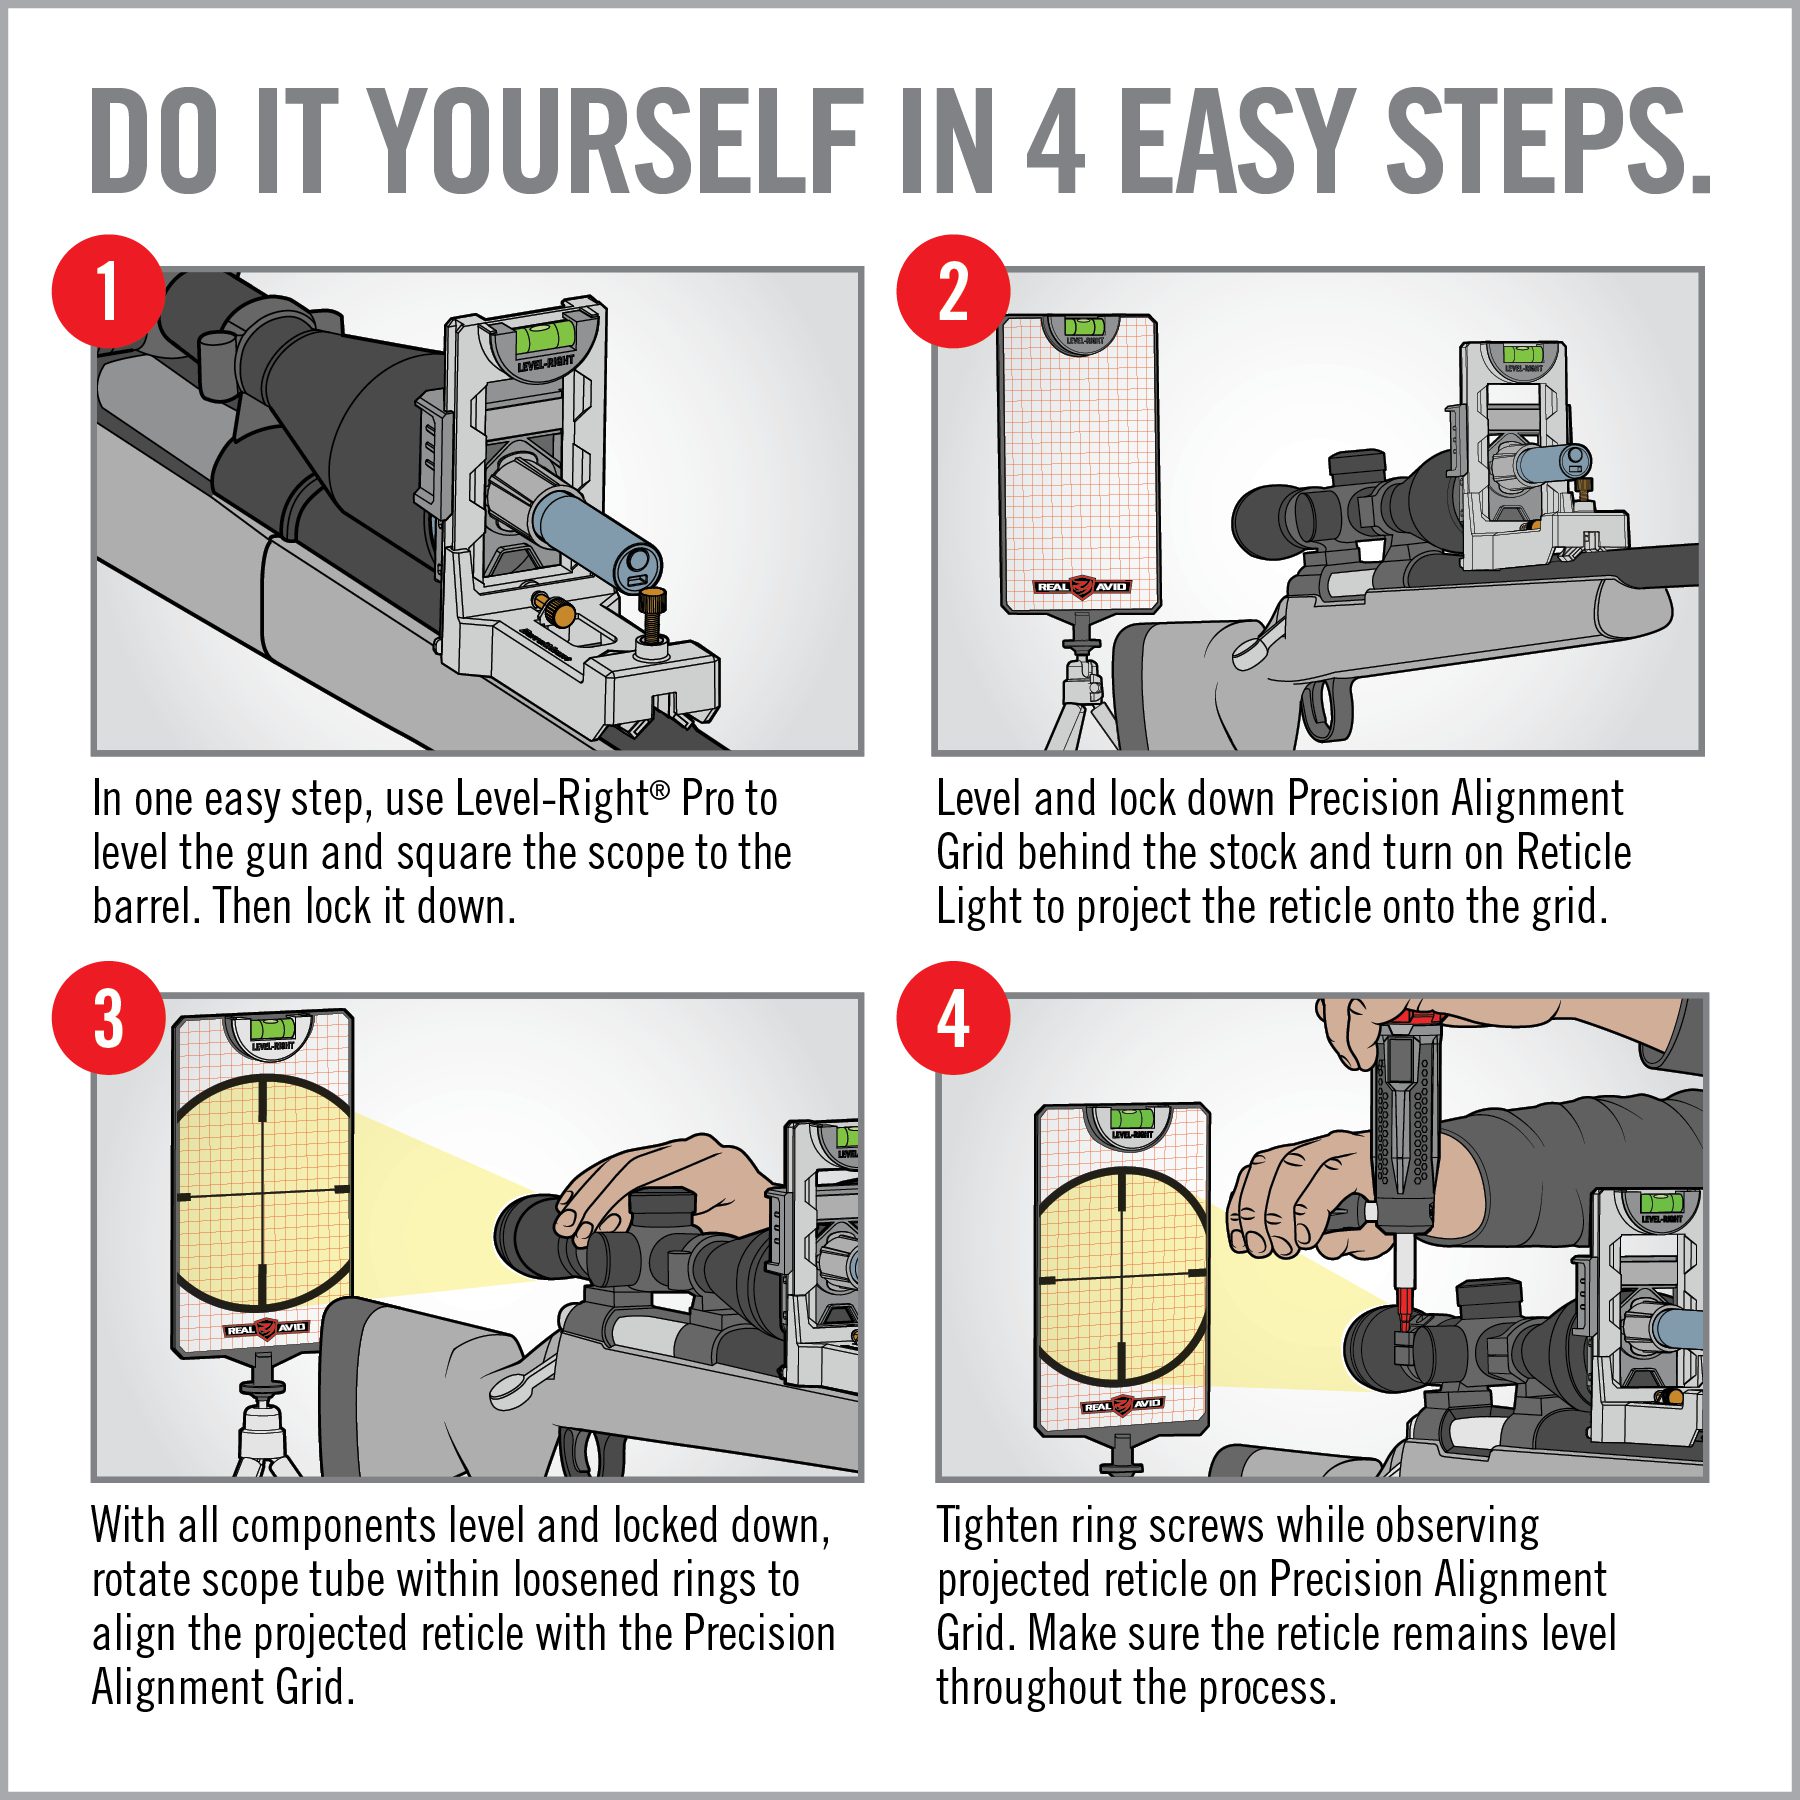 instructions on how to use a sewing machine